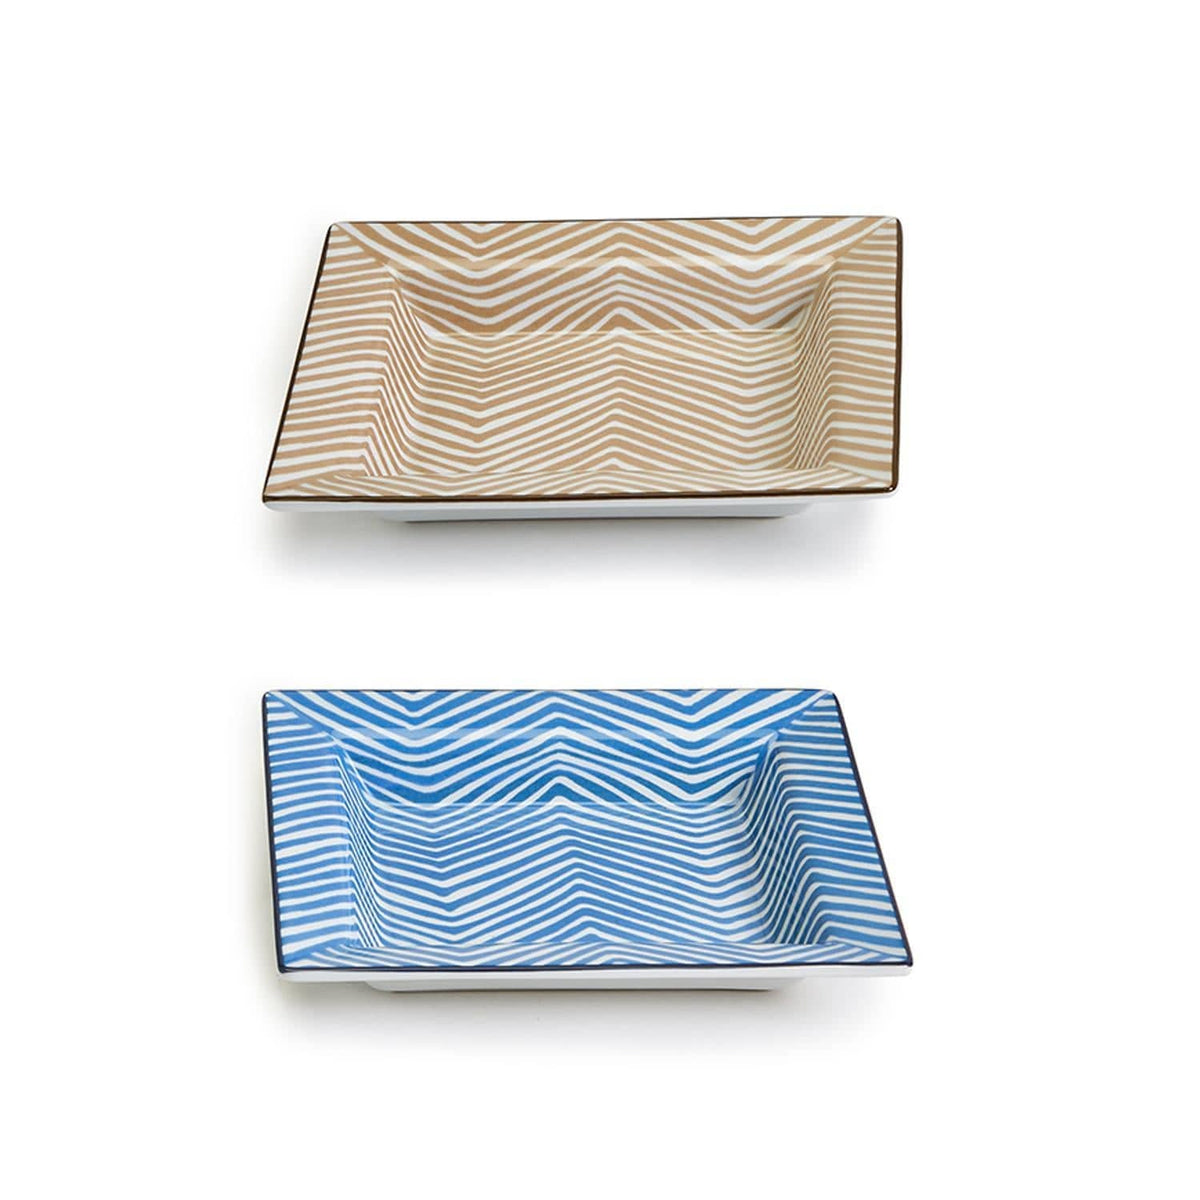 Herringbone Pattern Porcelain Decorative Tray in 2 Colors: Camel, French Blue - The Preppy Bunny